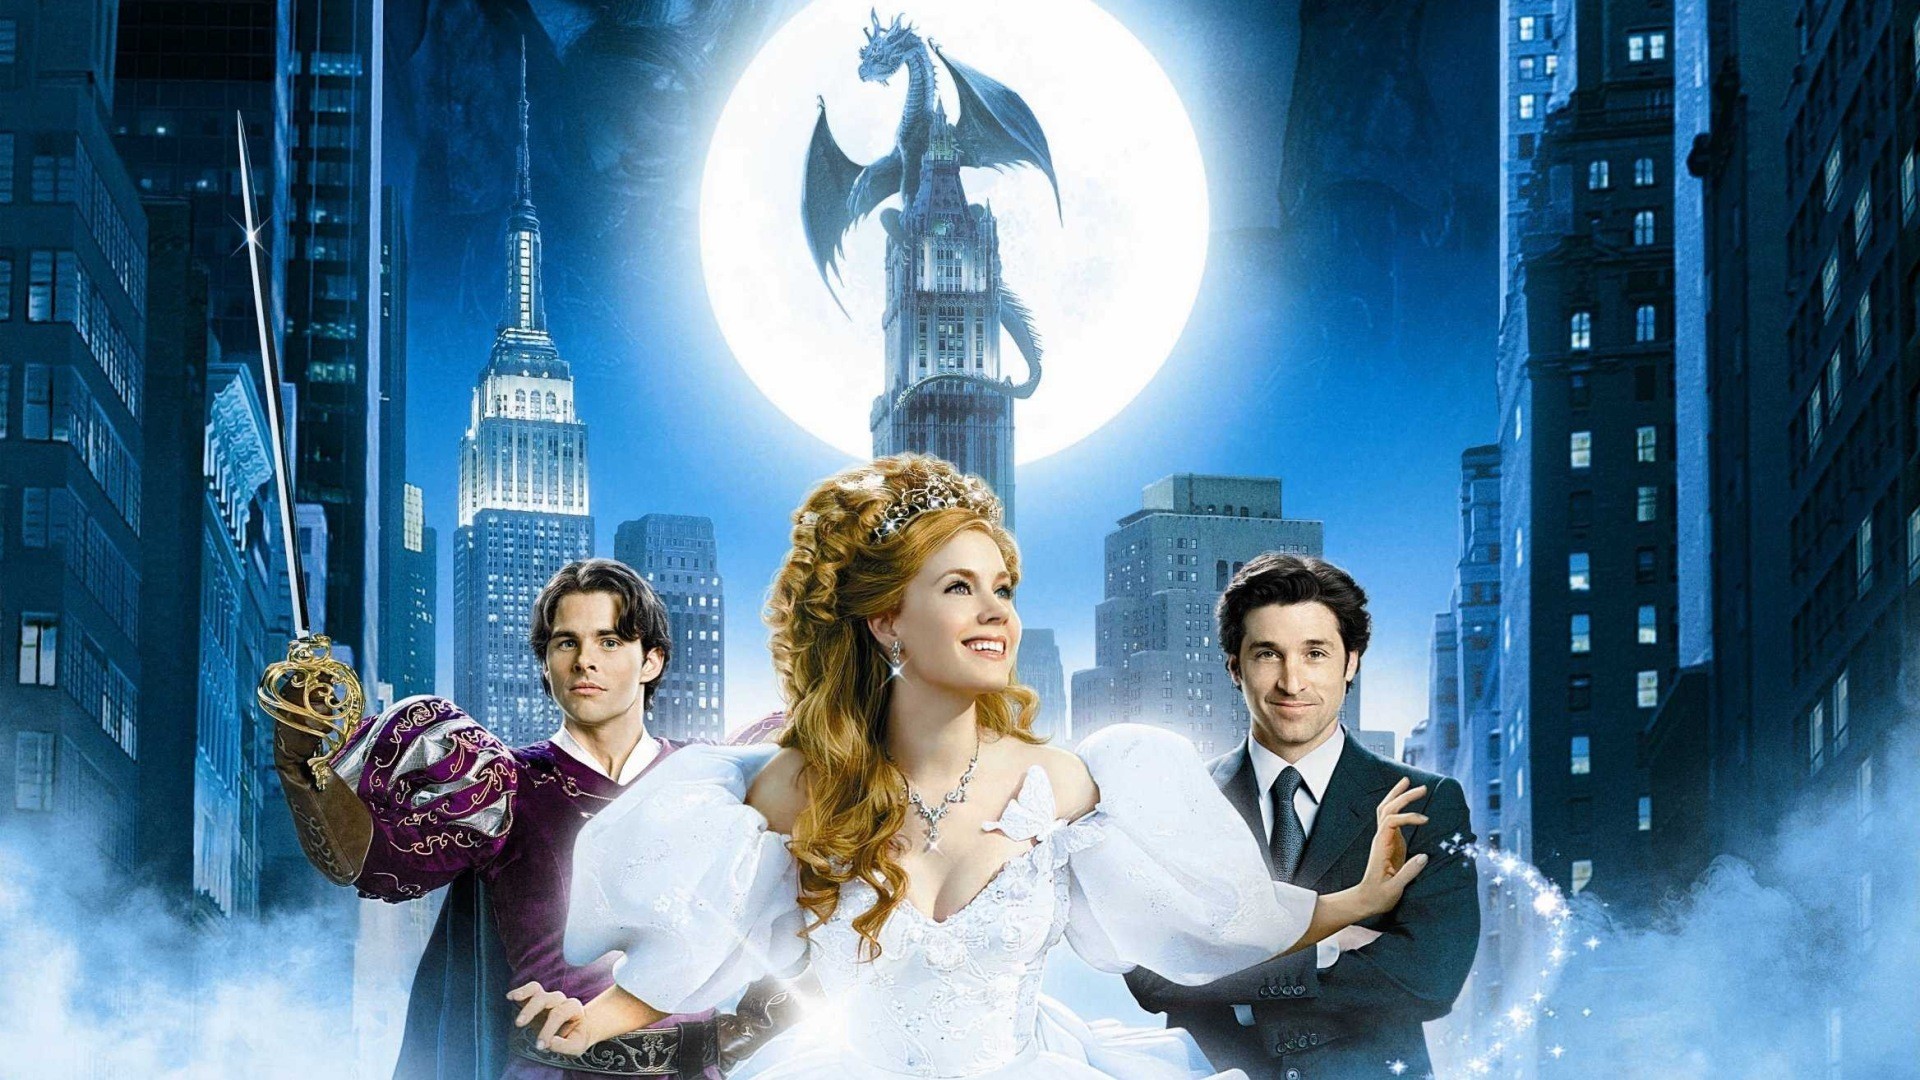 Movie Enchanted HD Wallpaper | Background Image